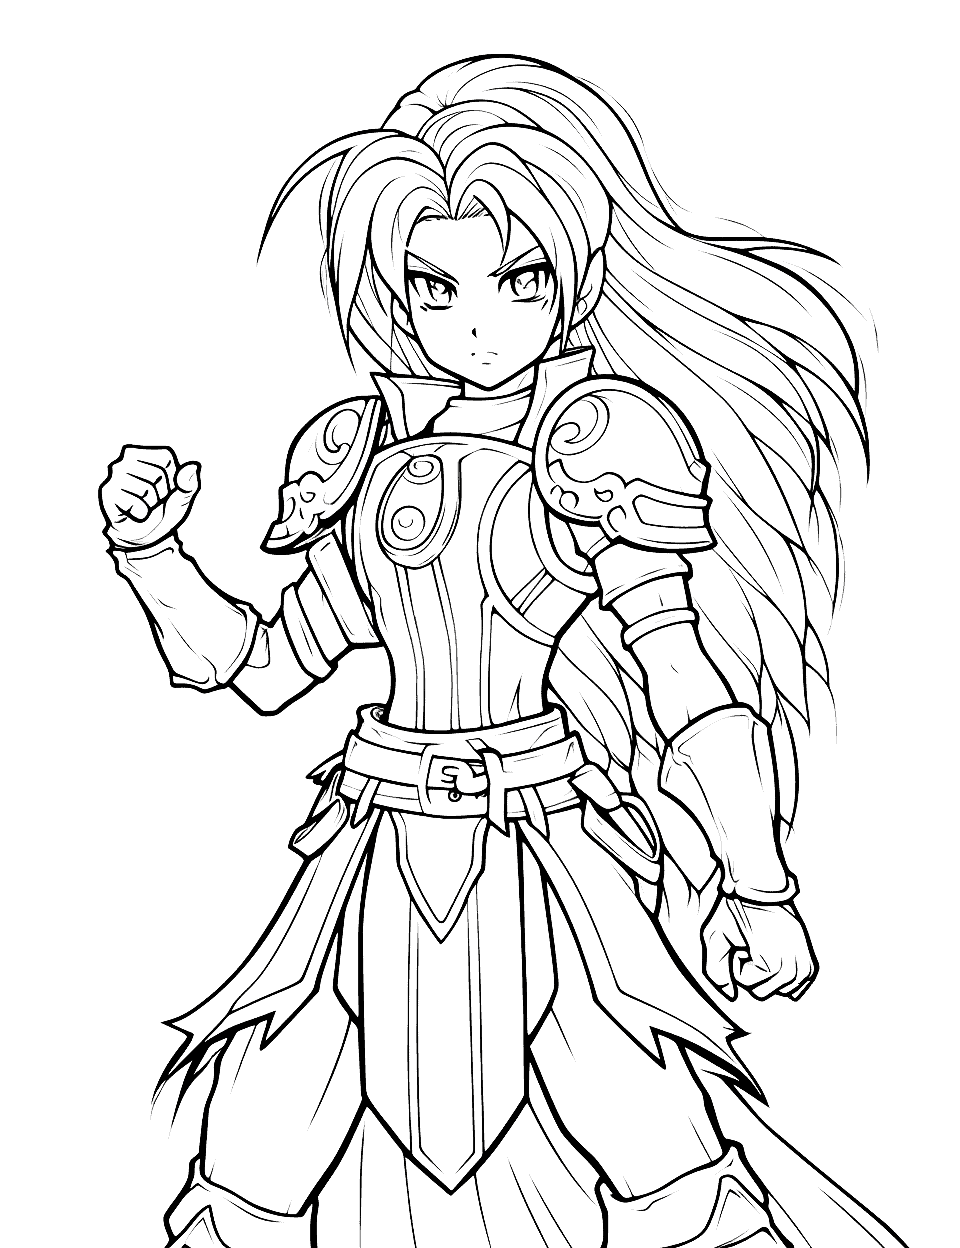 Anime Warrior Girl Coloring Page - A brave anime warrior girl with a detailed armor design, ready to fight.